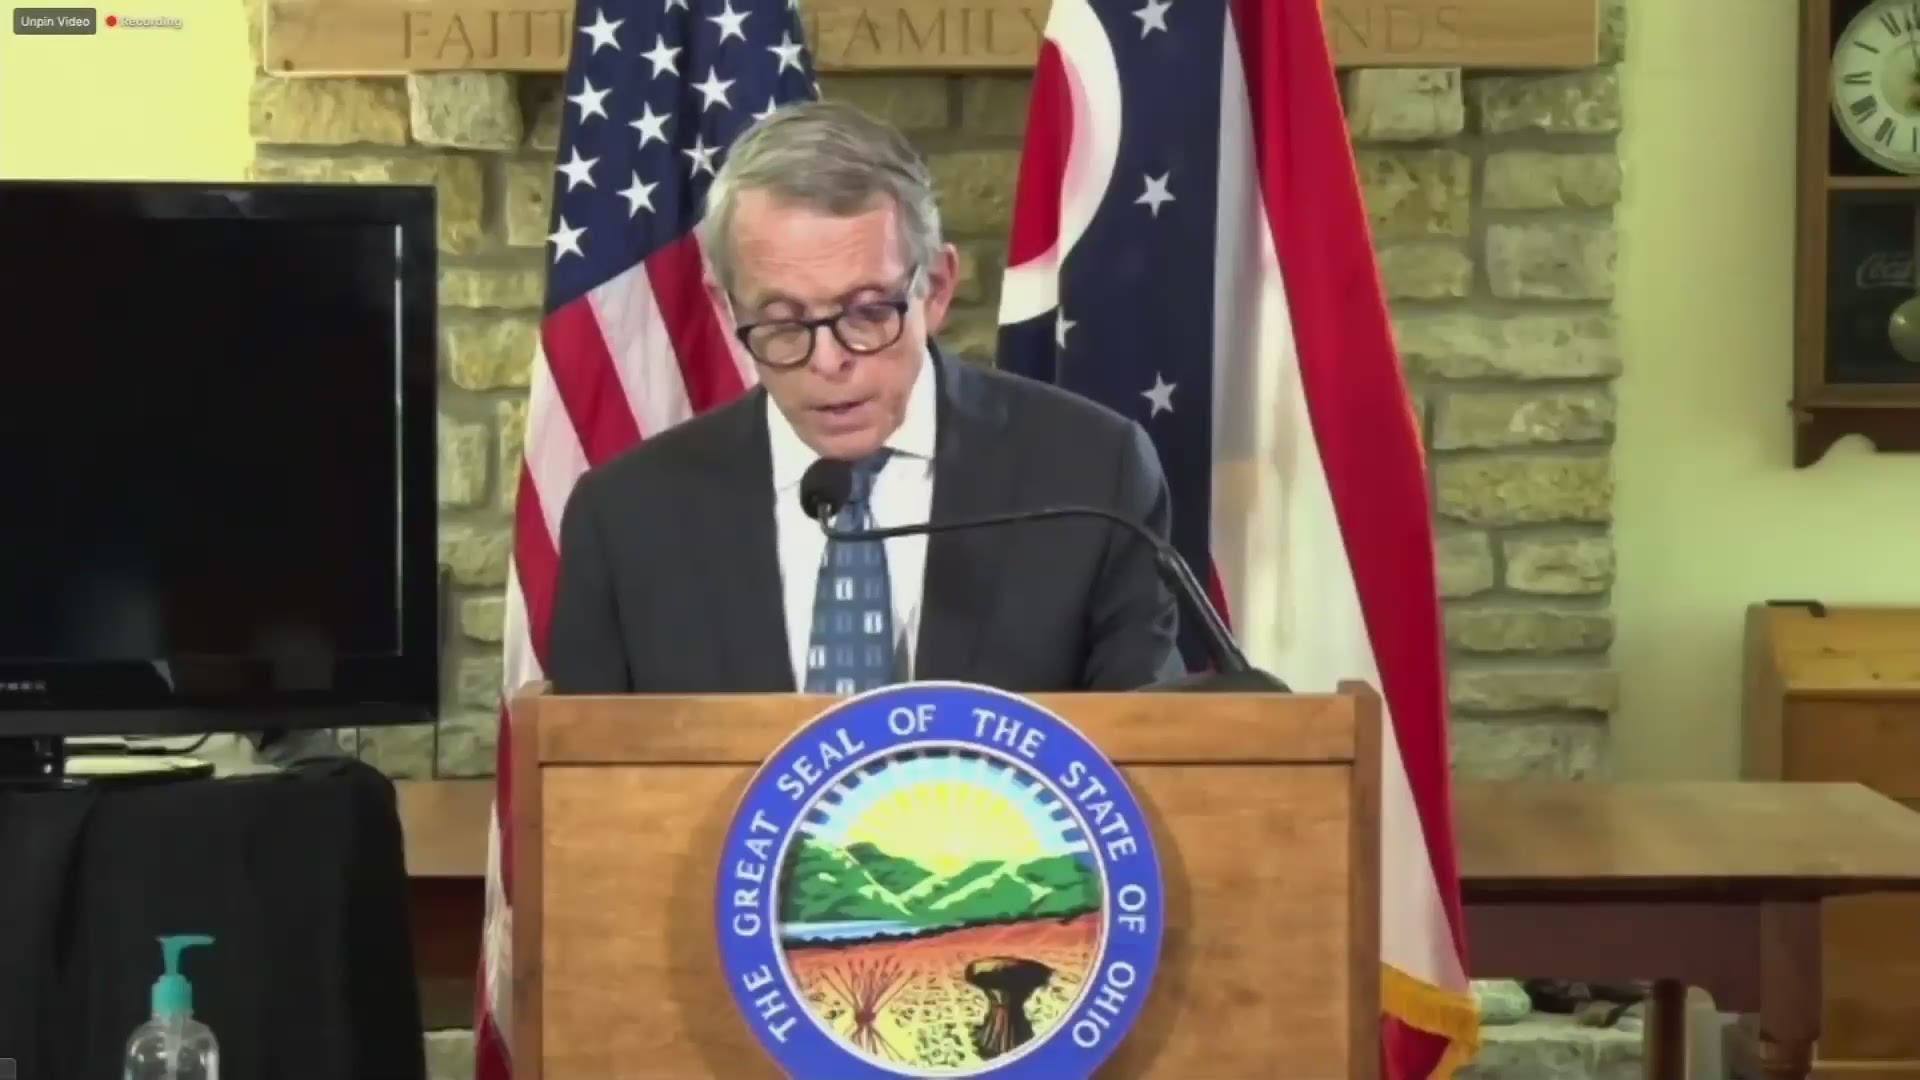 Ohio Governor DeWine revealed on Thursday that he'll make an announcement regarding high school sports on Tuesday, Aug. 18. "We have to slow this coronavirus down."